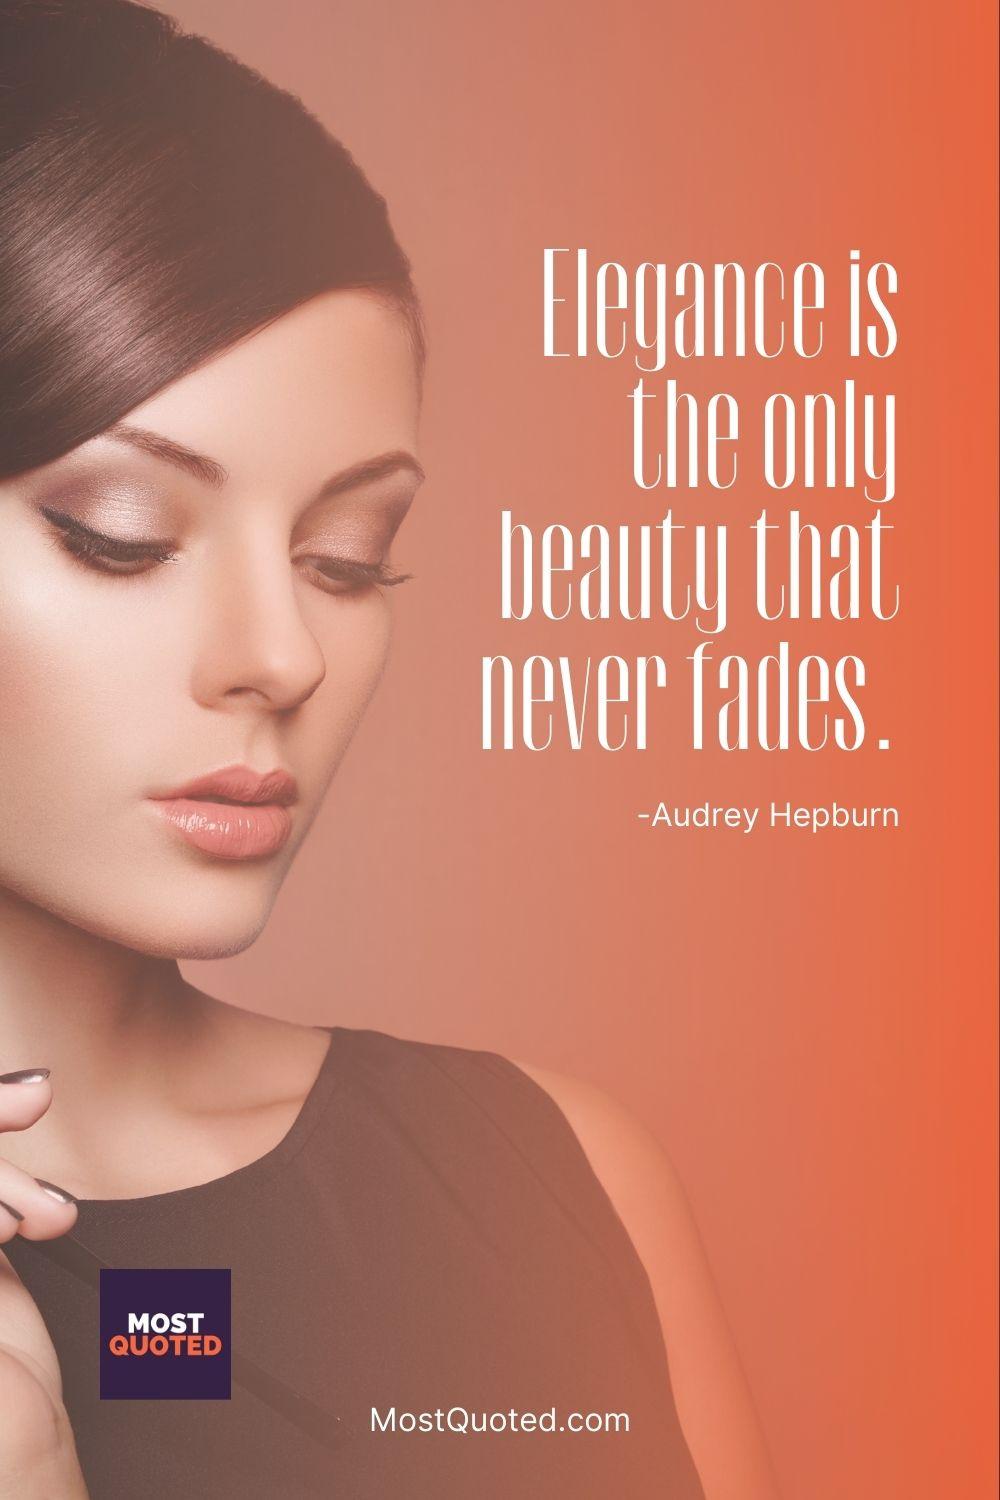 Elegance is the only beauty that never fades. - Audrey Hepburn